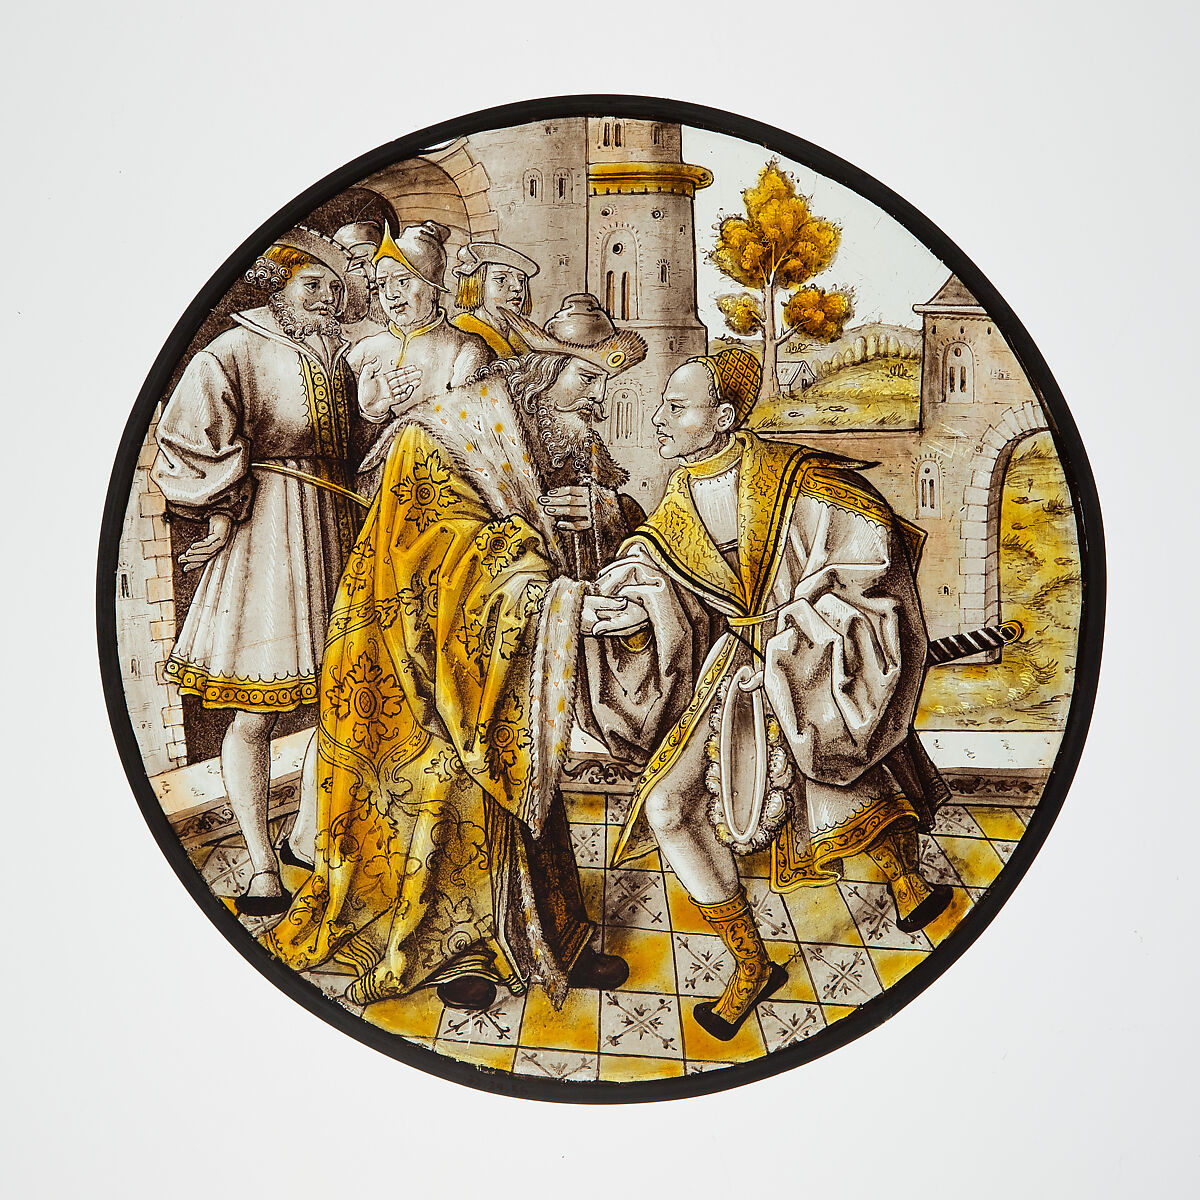 Roundel with Return of the Prodigal Son, Colorless glass, vitreous paint and silver stain, German 